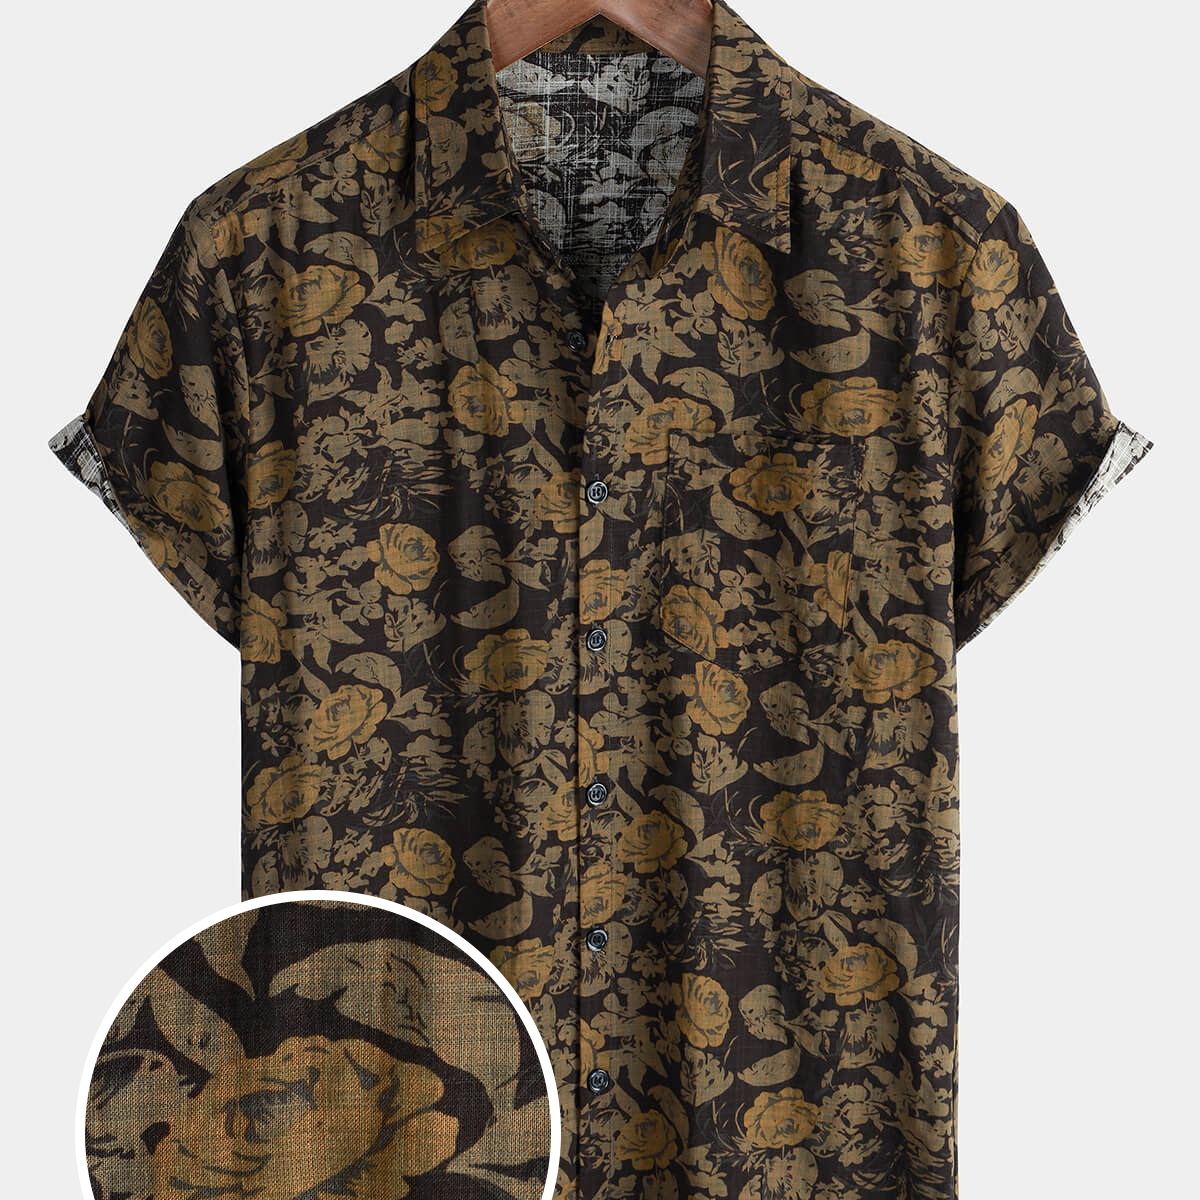 Men's Floral Vintage Holiday Cotton Button Up Short Sleeve Shirt